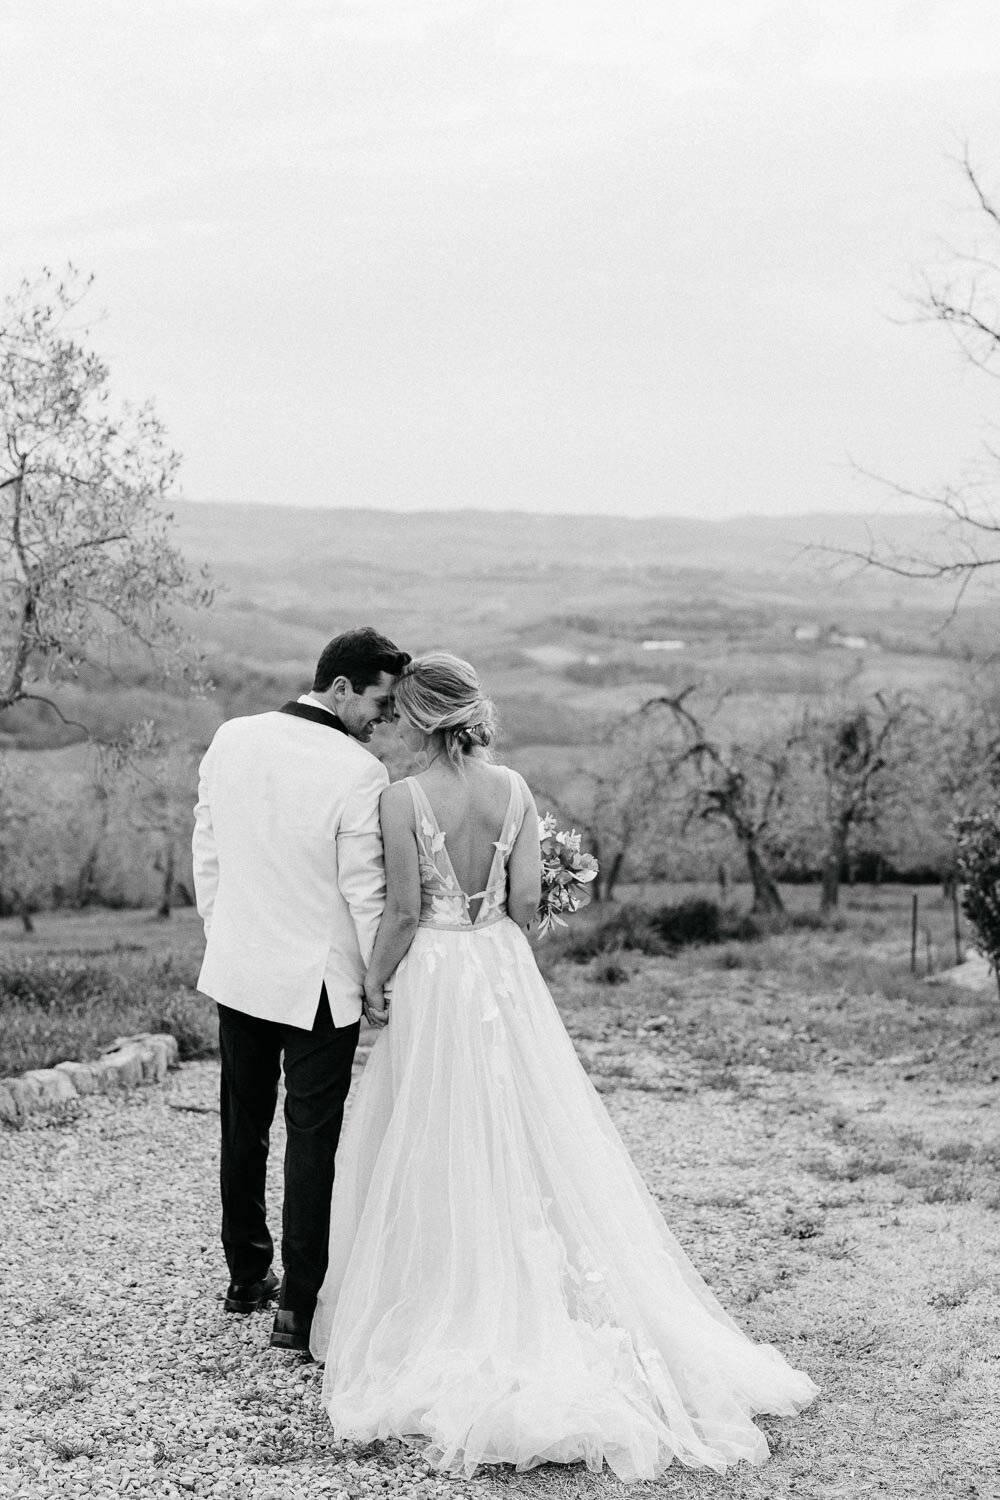 Intimate portrait bride and groom in tuscany